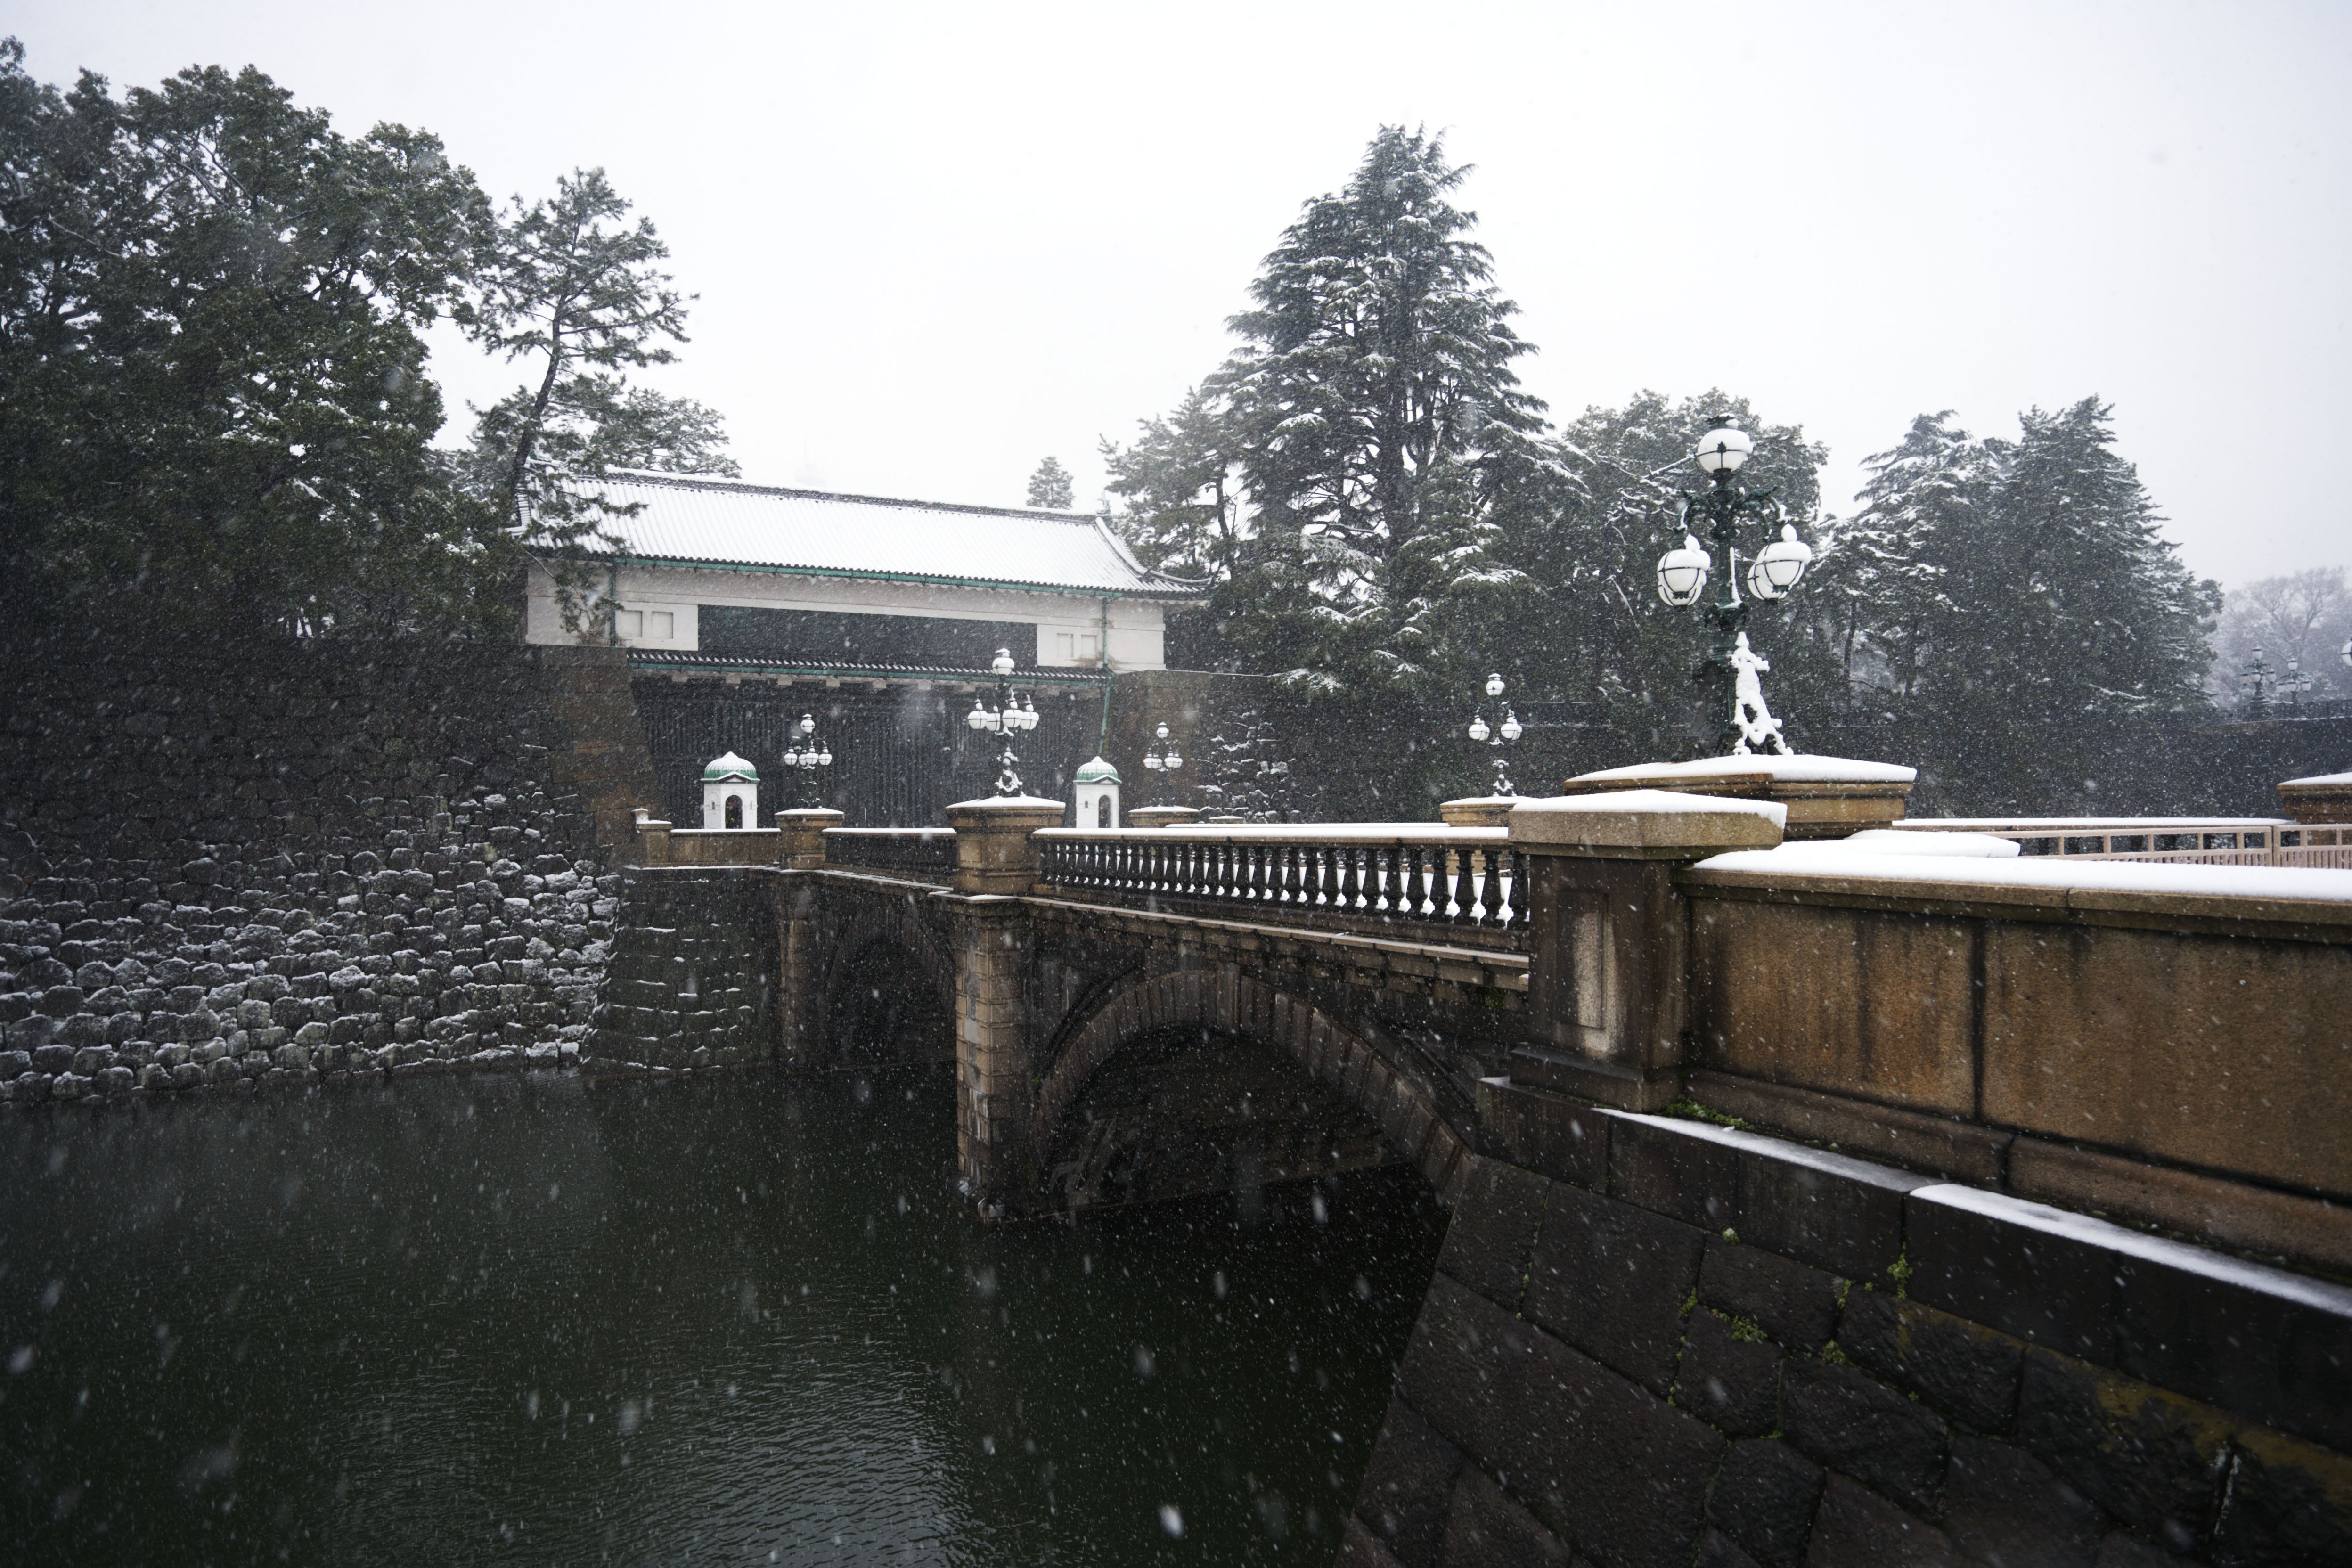 photo,material,free,landscape,picture,stock photo,Creative Commons,Snow Double Bridge, Moat, Palace, Imperial Guard, Snowfall